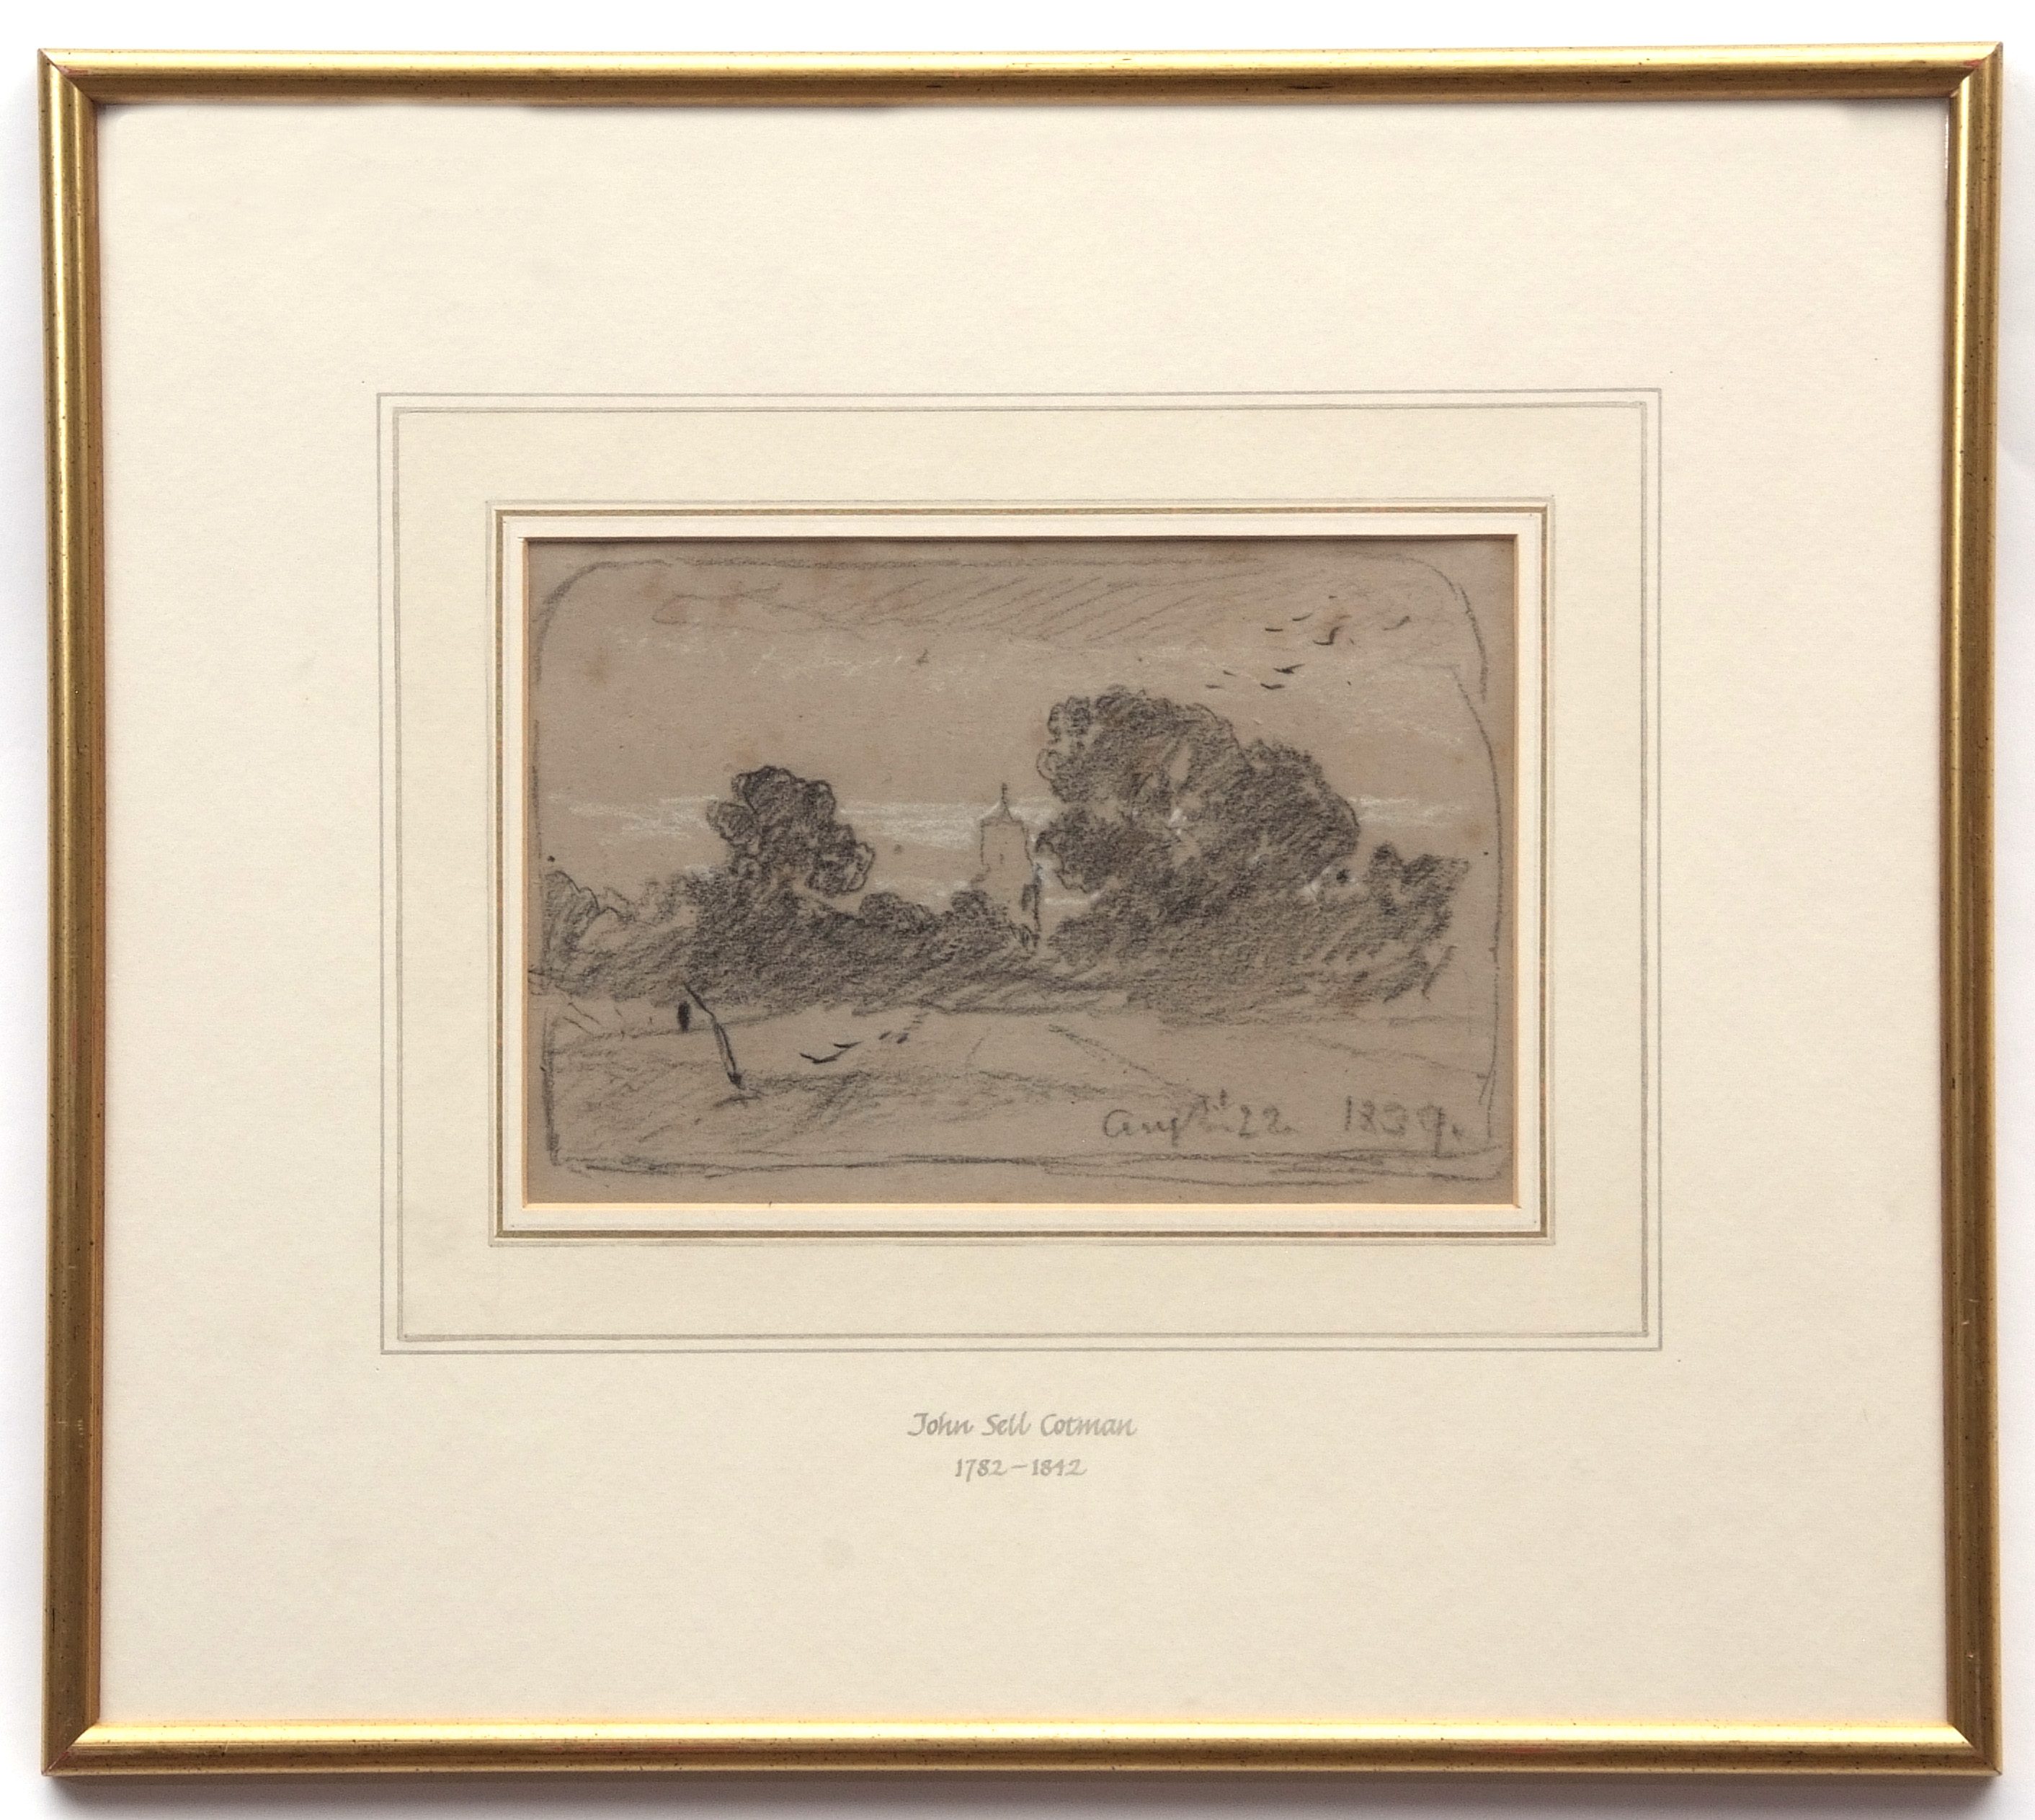 JOHN SELL COTMAN (1782-1842) Landscape with church charcoal drawing, dated August 22 1839 5 x 8ins - Image 2 of 2